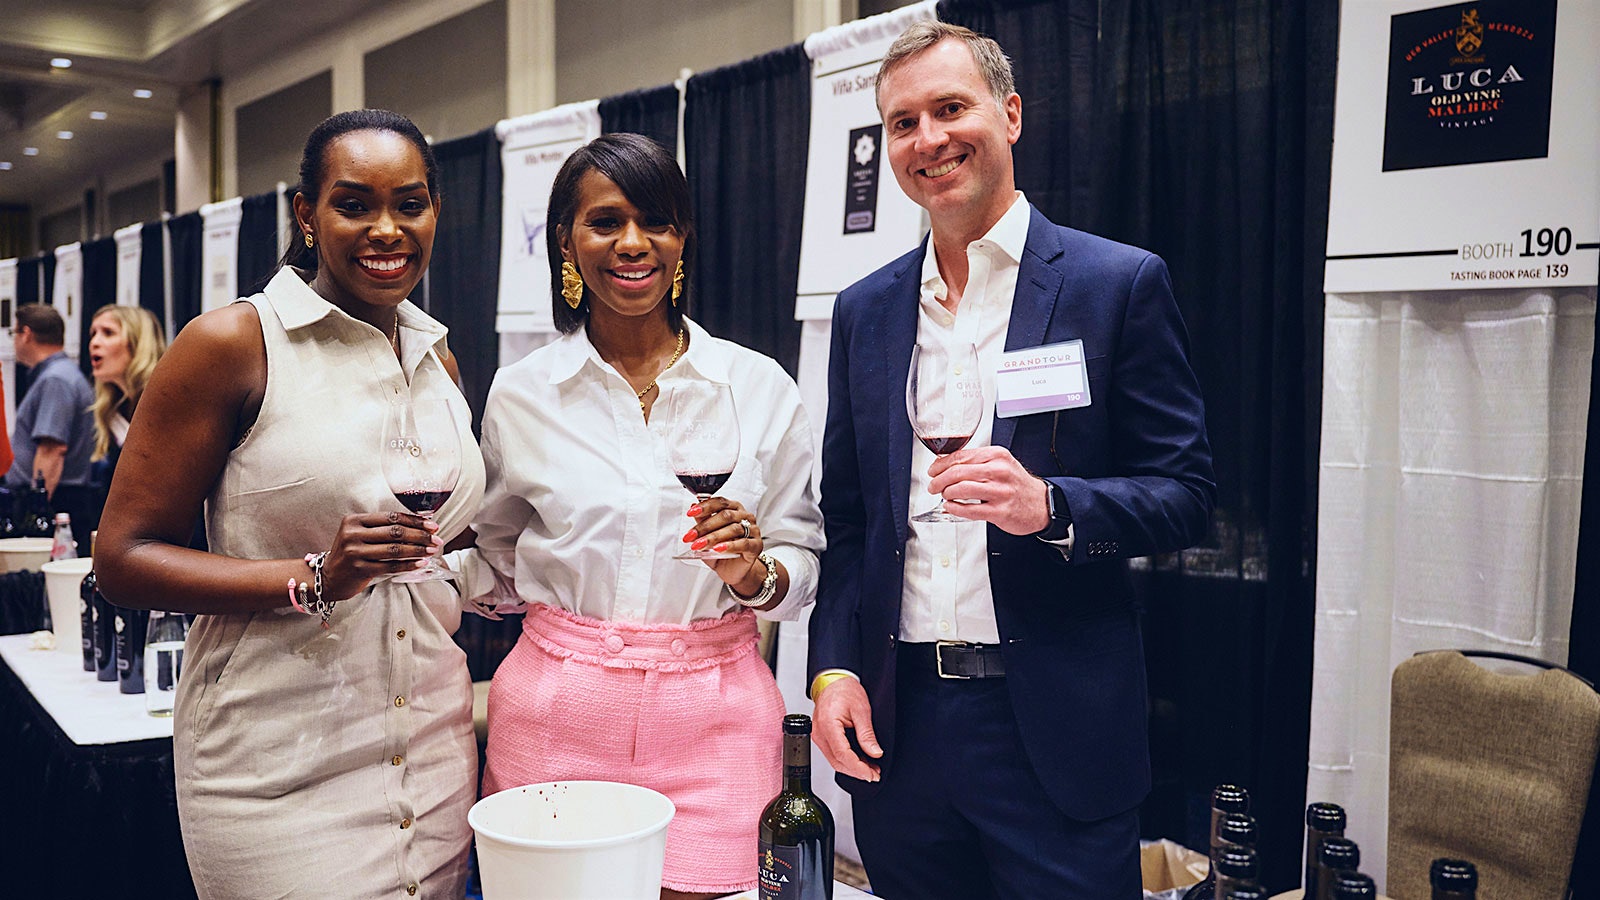  Maxine Anderson and Chanel Fields chatted with Kristian Jelm about Malbec at the Wine Spectator Grand Tour in New Orleans.